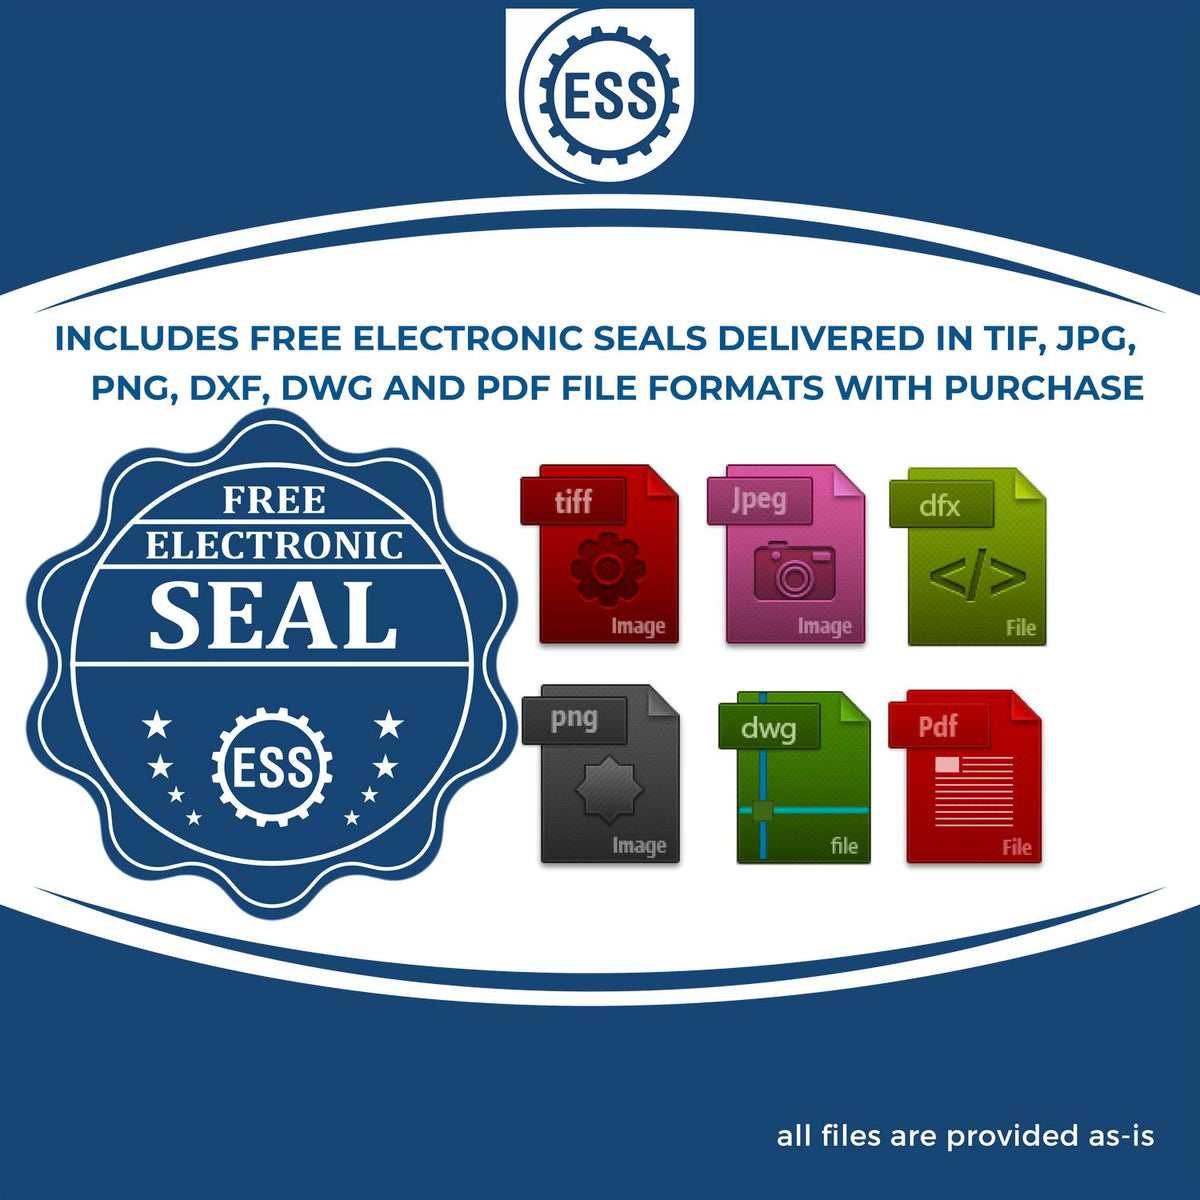 An infographic for the free electronic seal for the Wooden Handle Michigan State Seal Notary Public Stamp illustrating the different file type icons such as DXF, DWG, TIF, JPG and PNG.